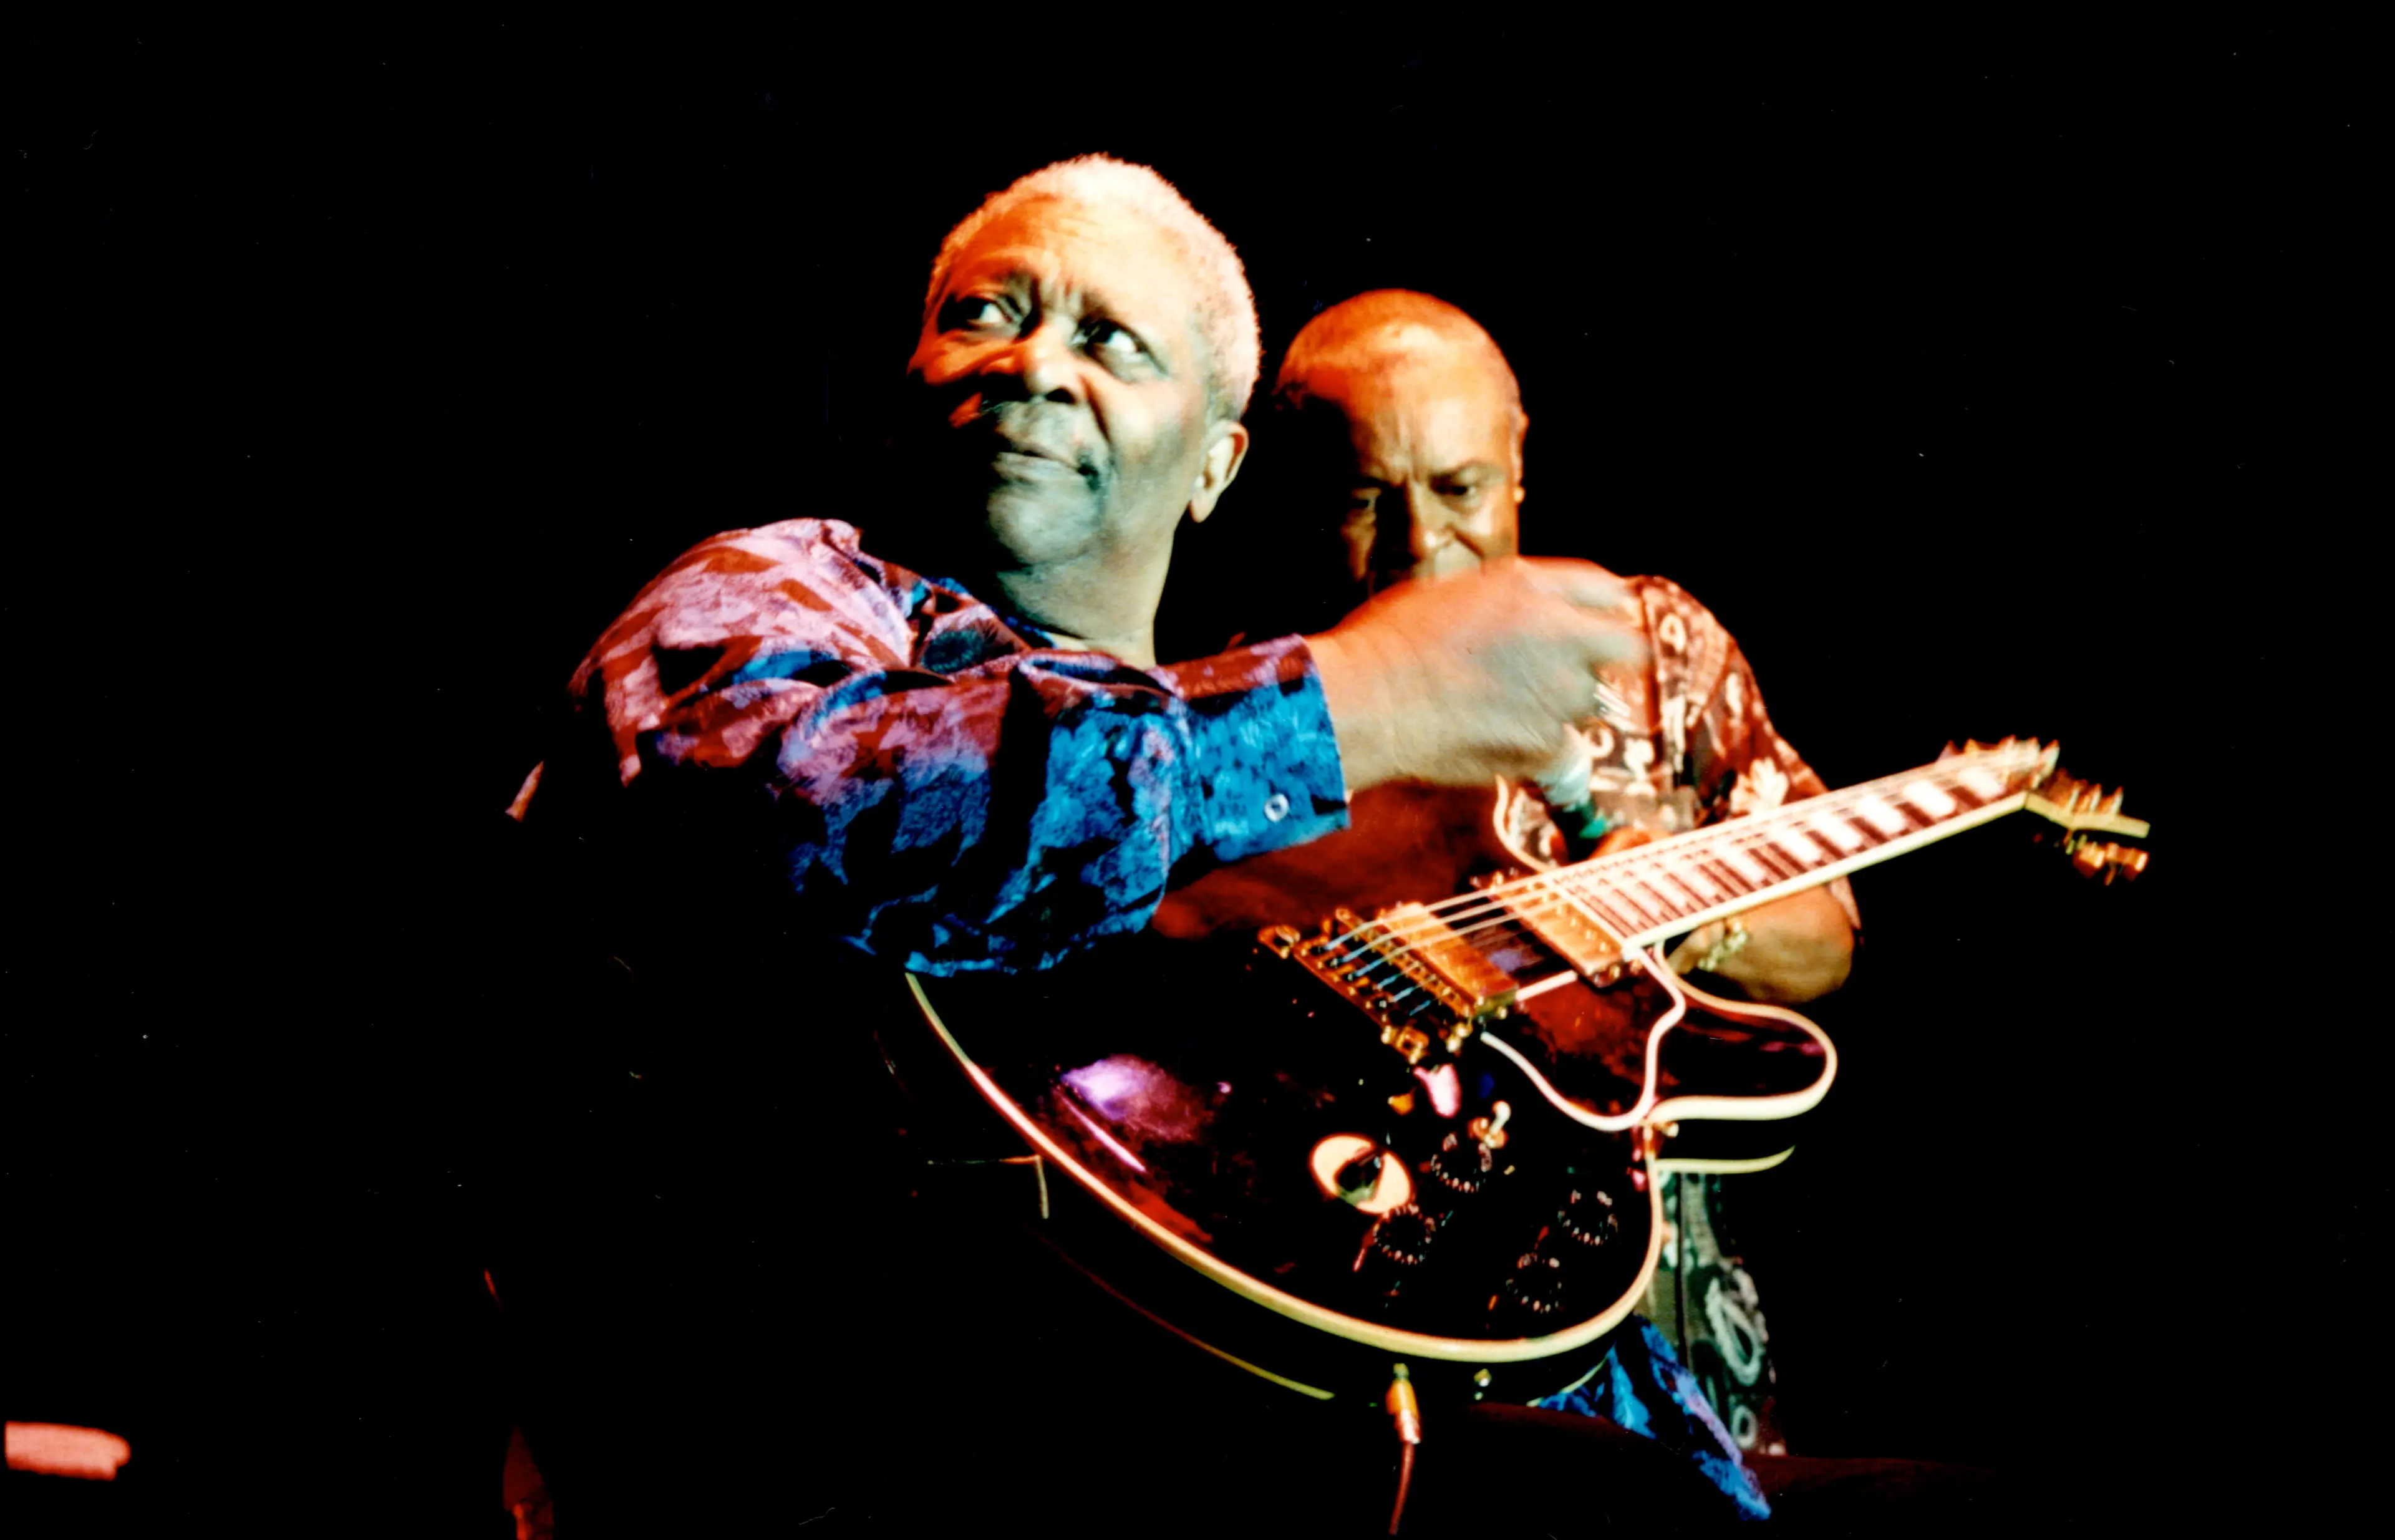 BB King performing live